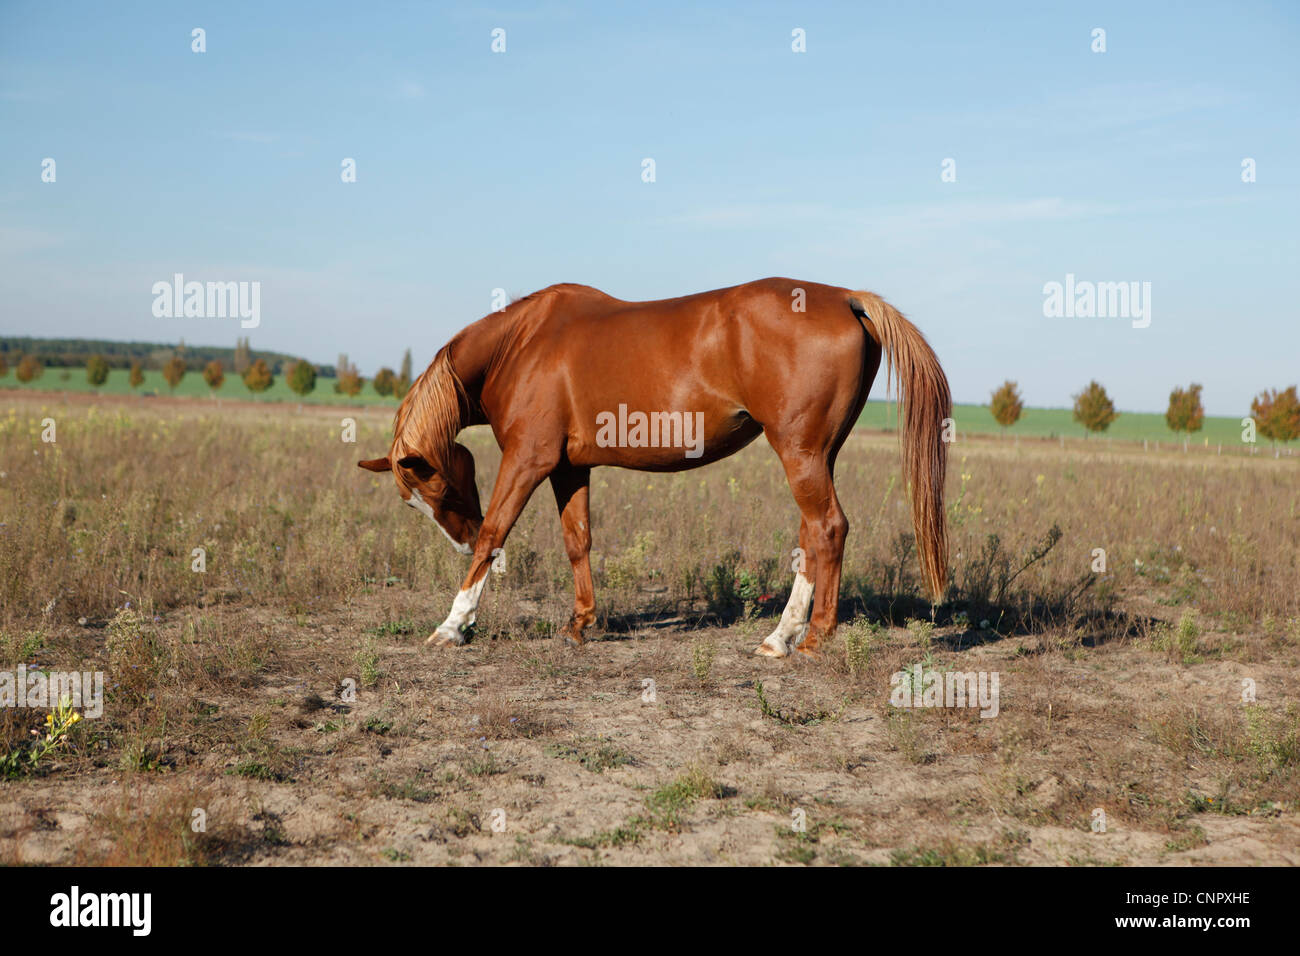 One brown horse walking in the fields Stock Photo